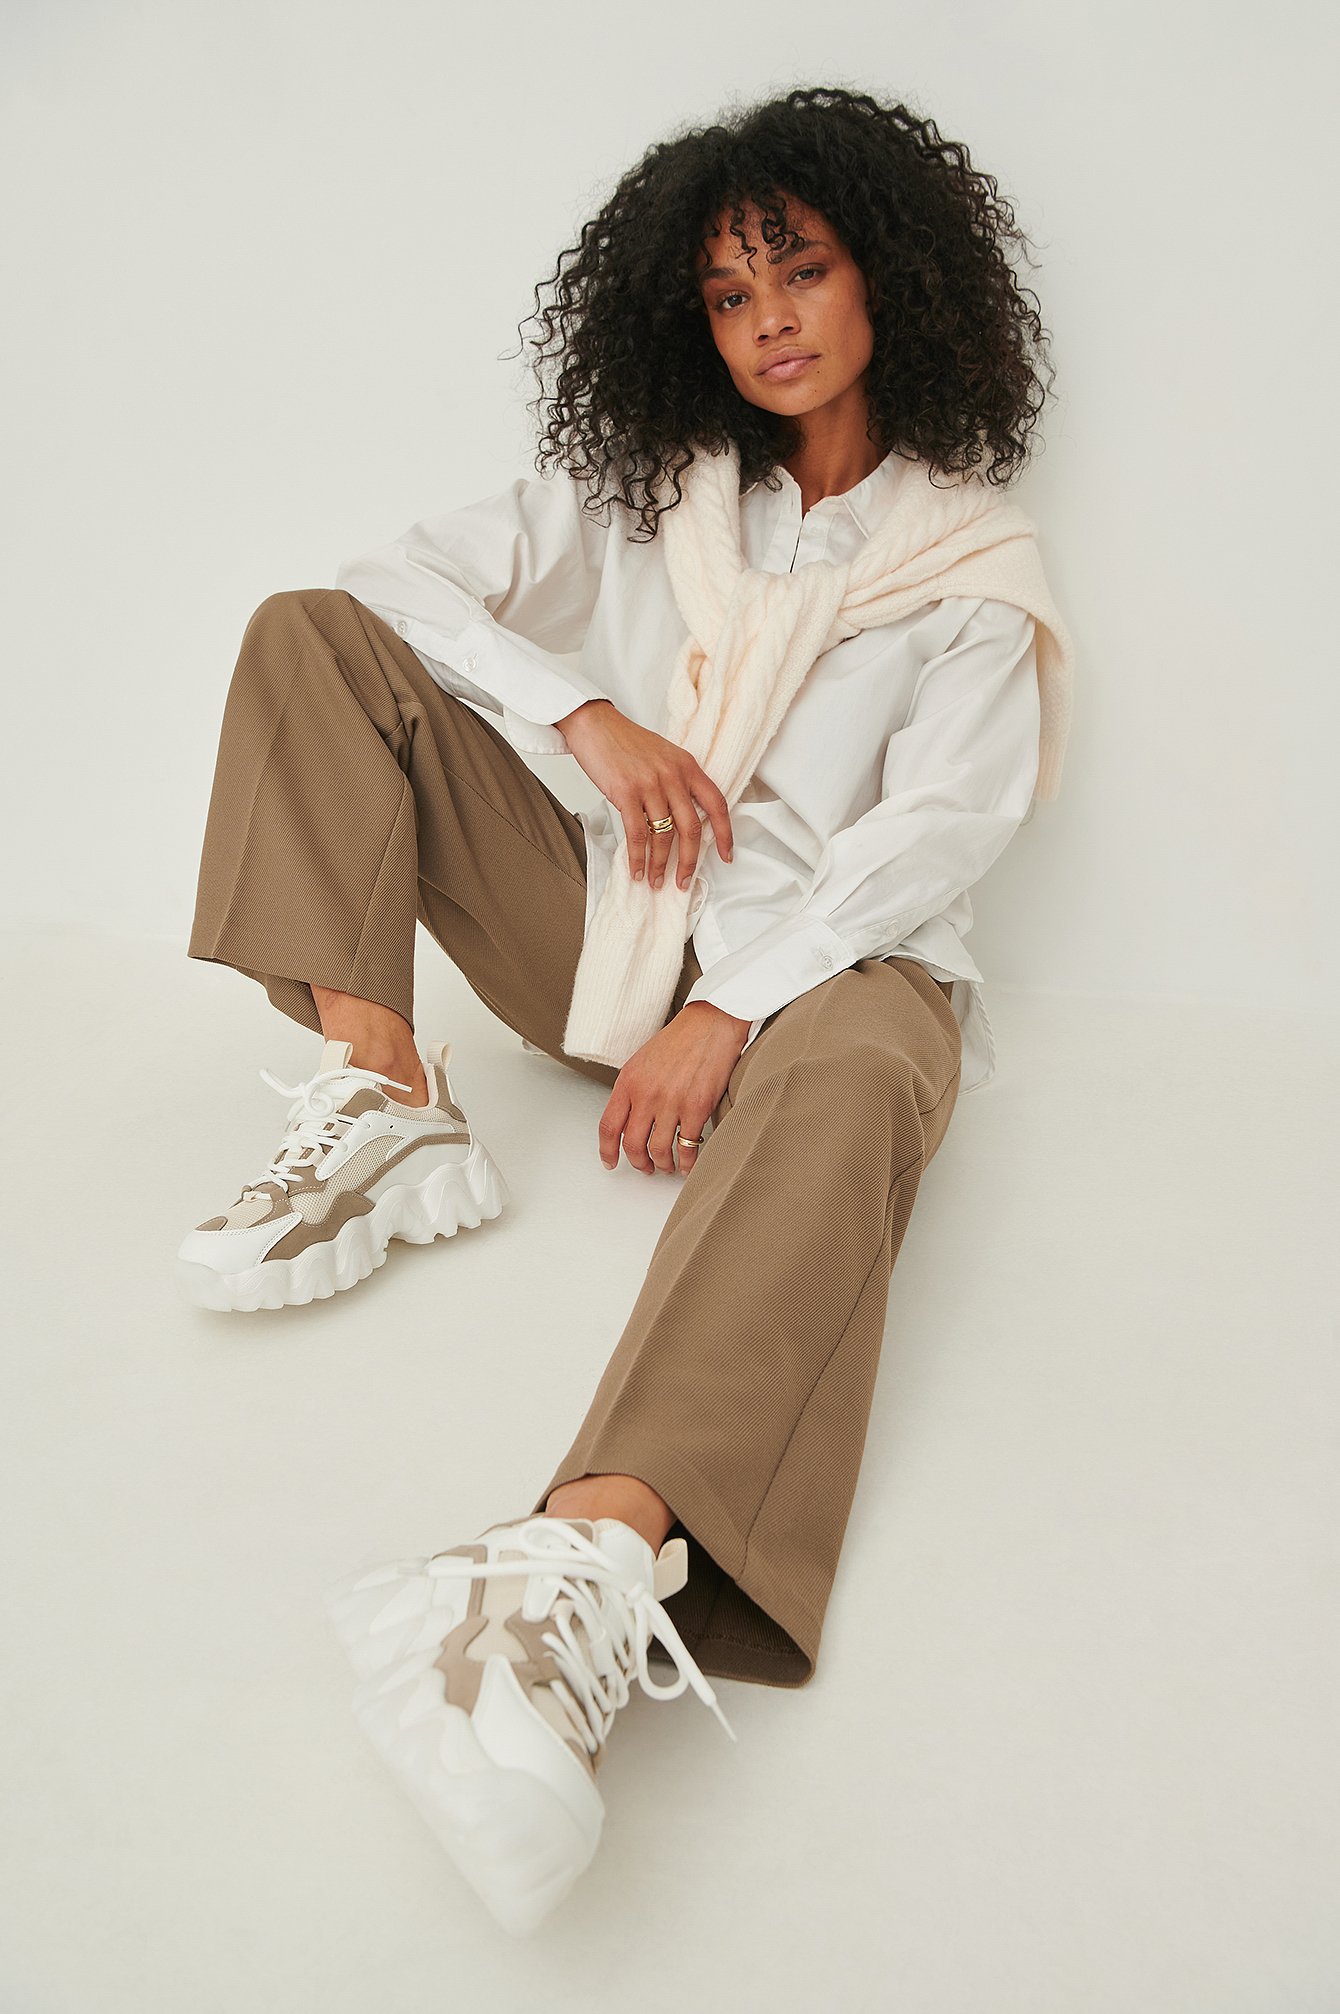 White/Beige Rounded Profile Trainers